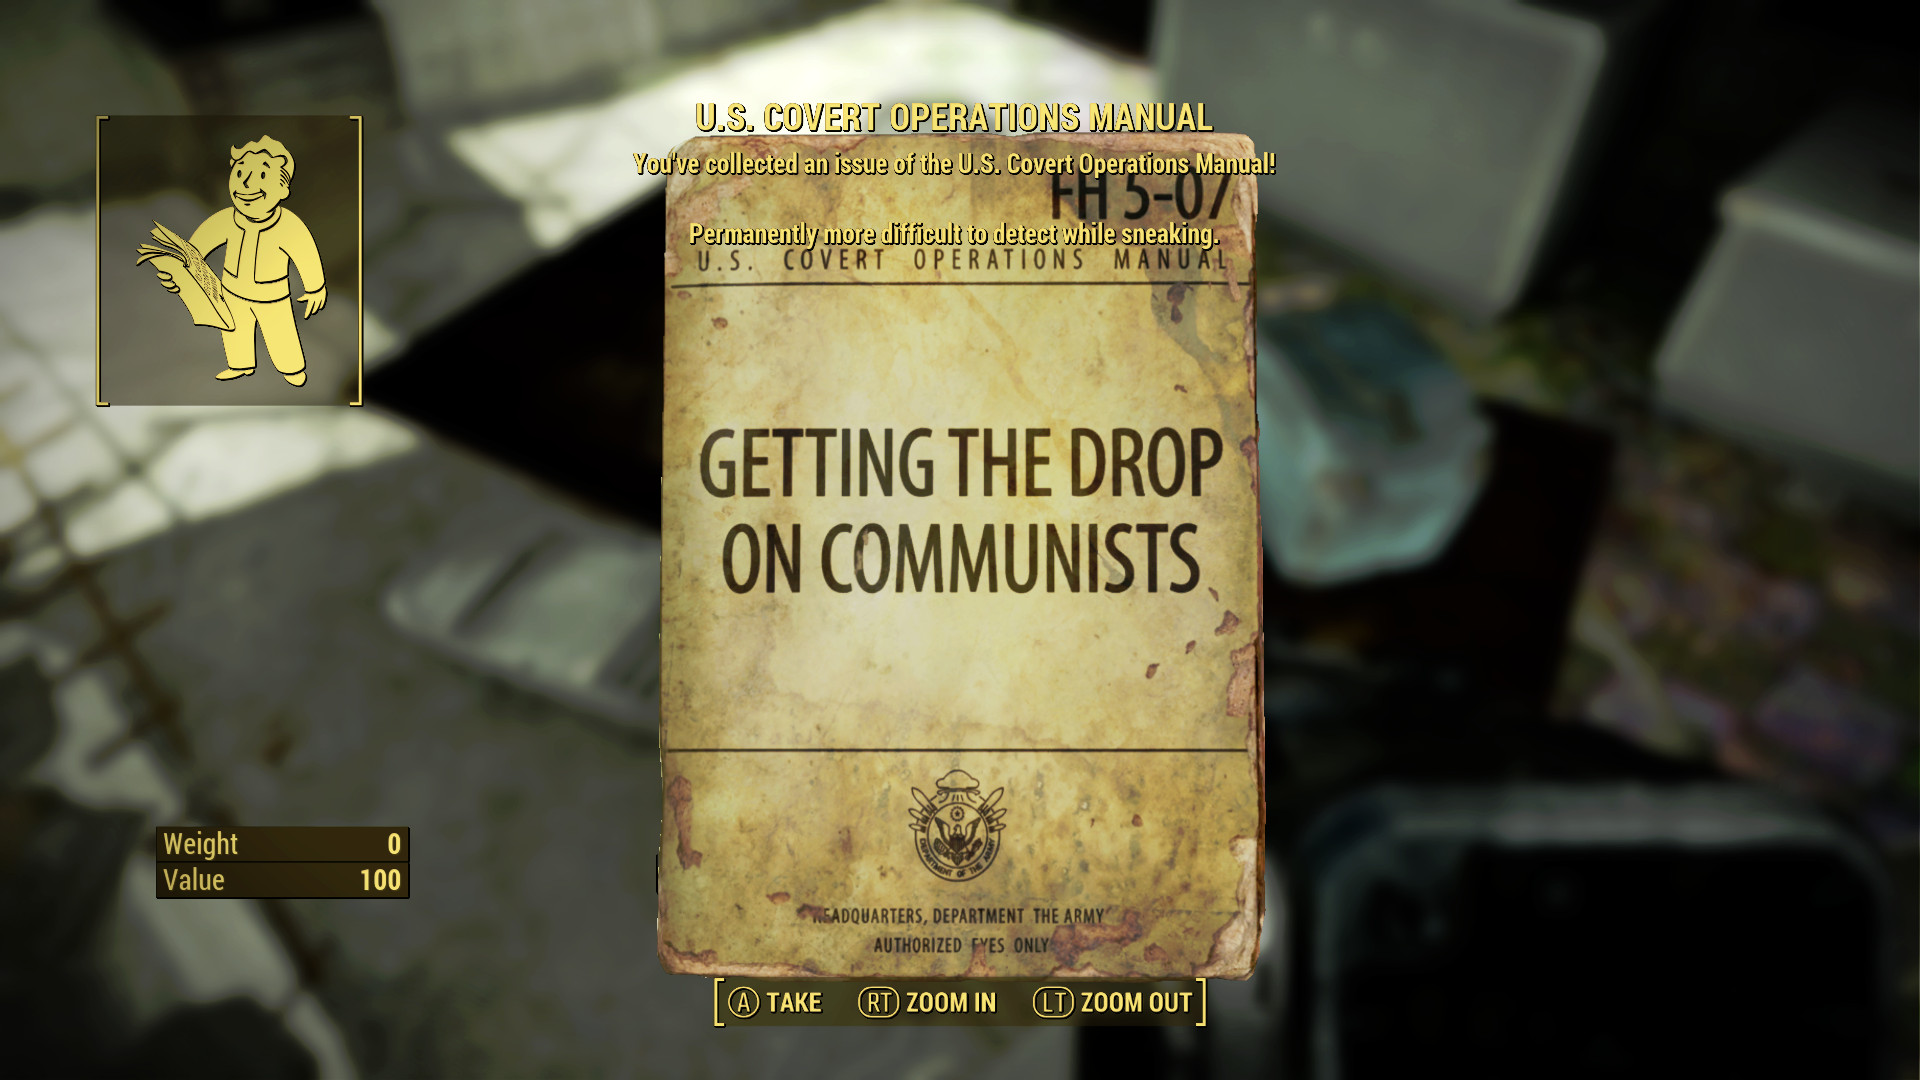 Fallout 4 Guide - U.S. Covert Operations Manual Locations